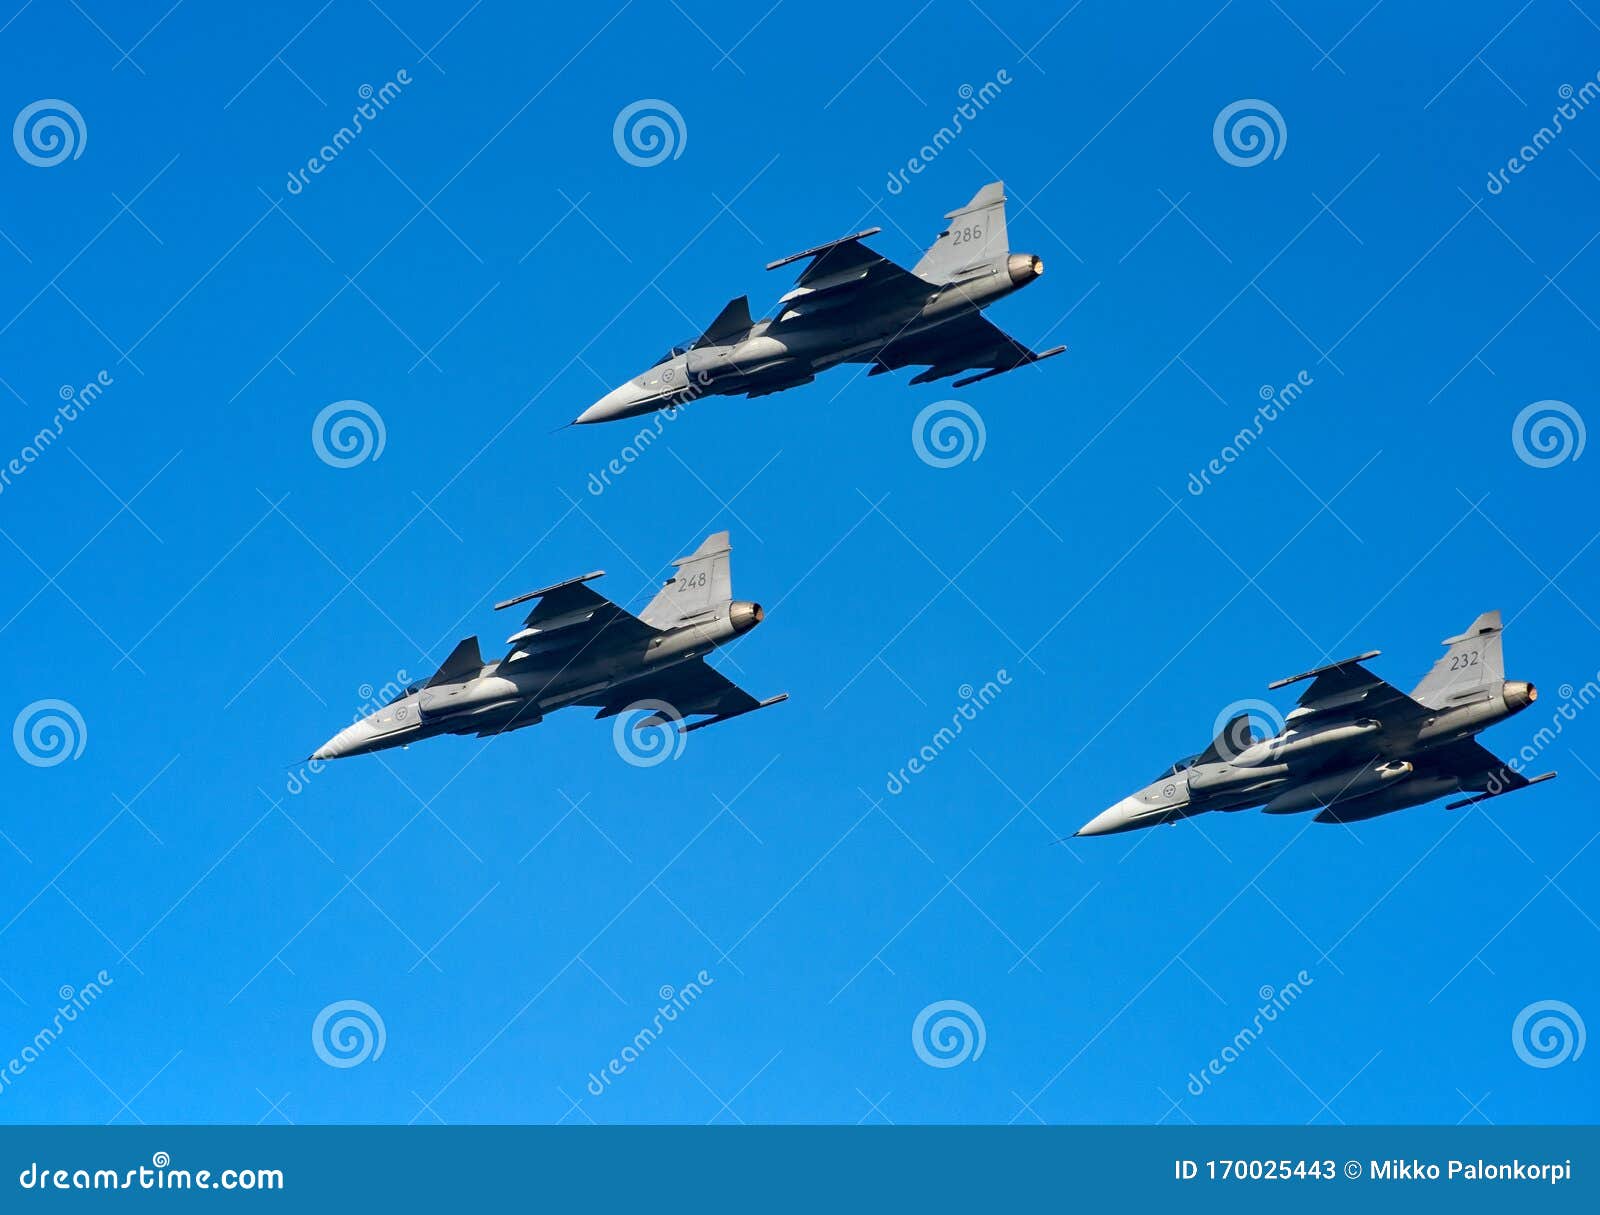 emulsie Reductor Aantrekkingskracht Squadron of Swedish Air Force Saab JAS 39 Gripen Multirole Fighter Jets  Editorial Stock Photo - Image of force, gripen: 170025443